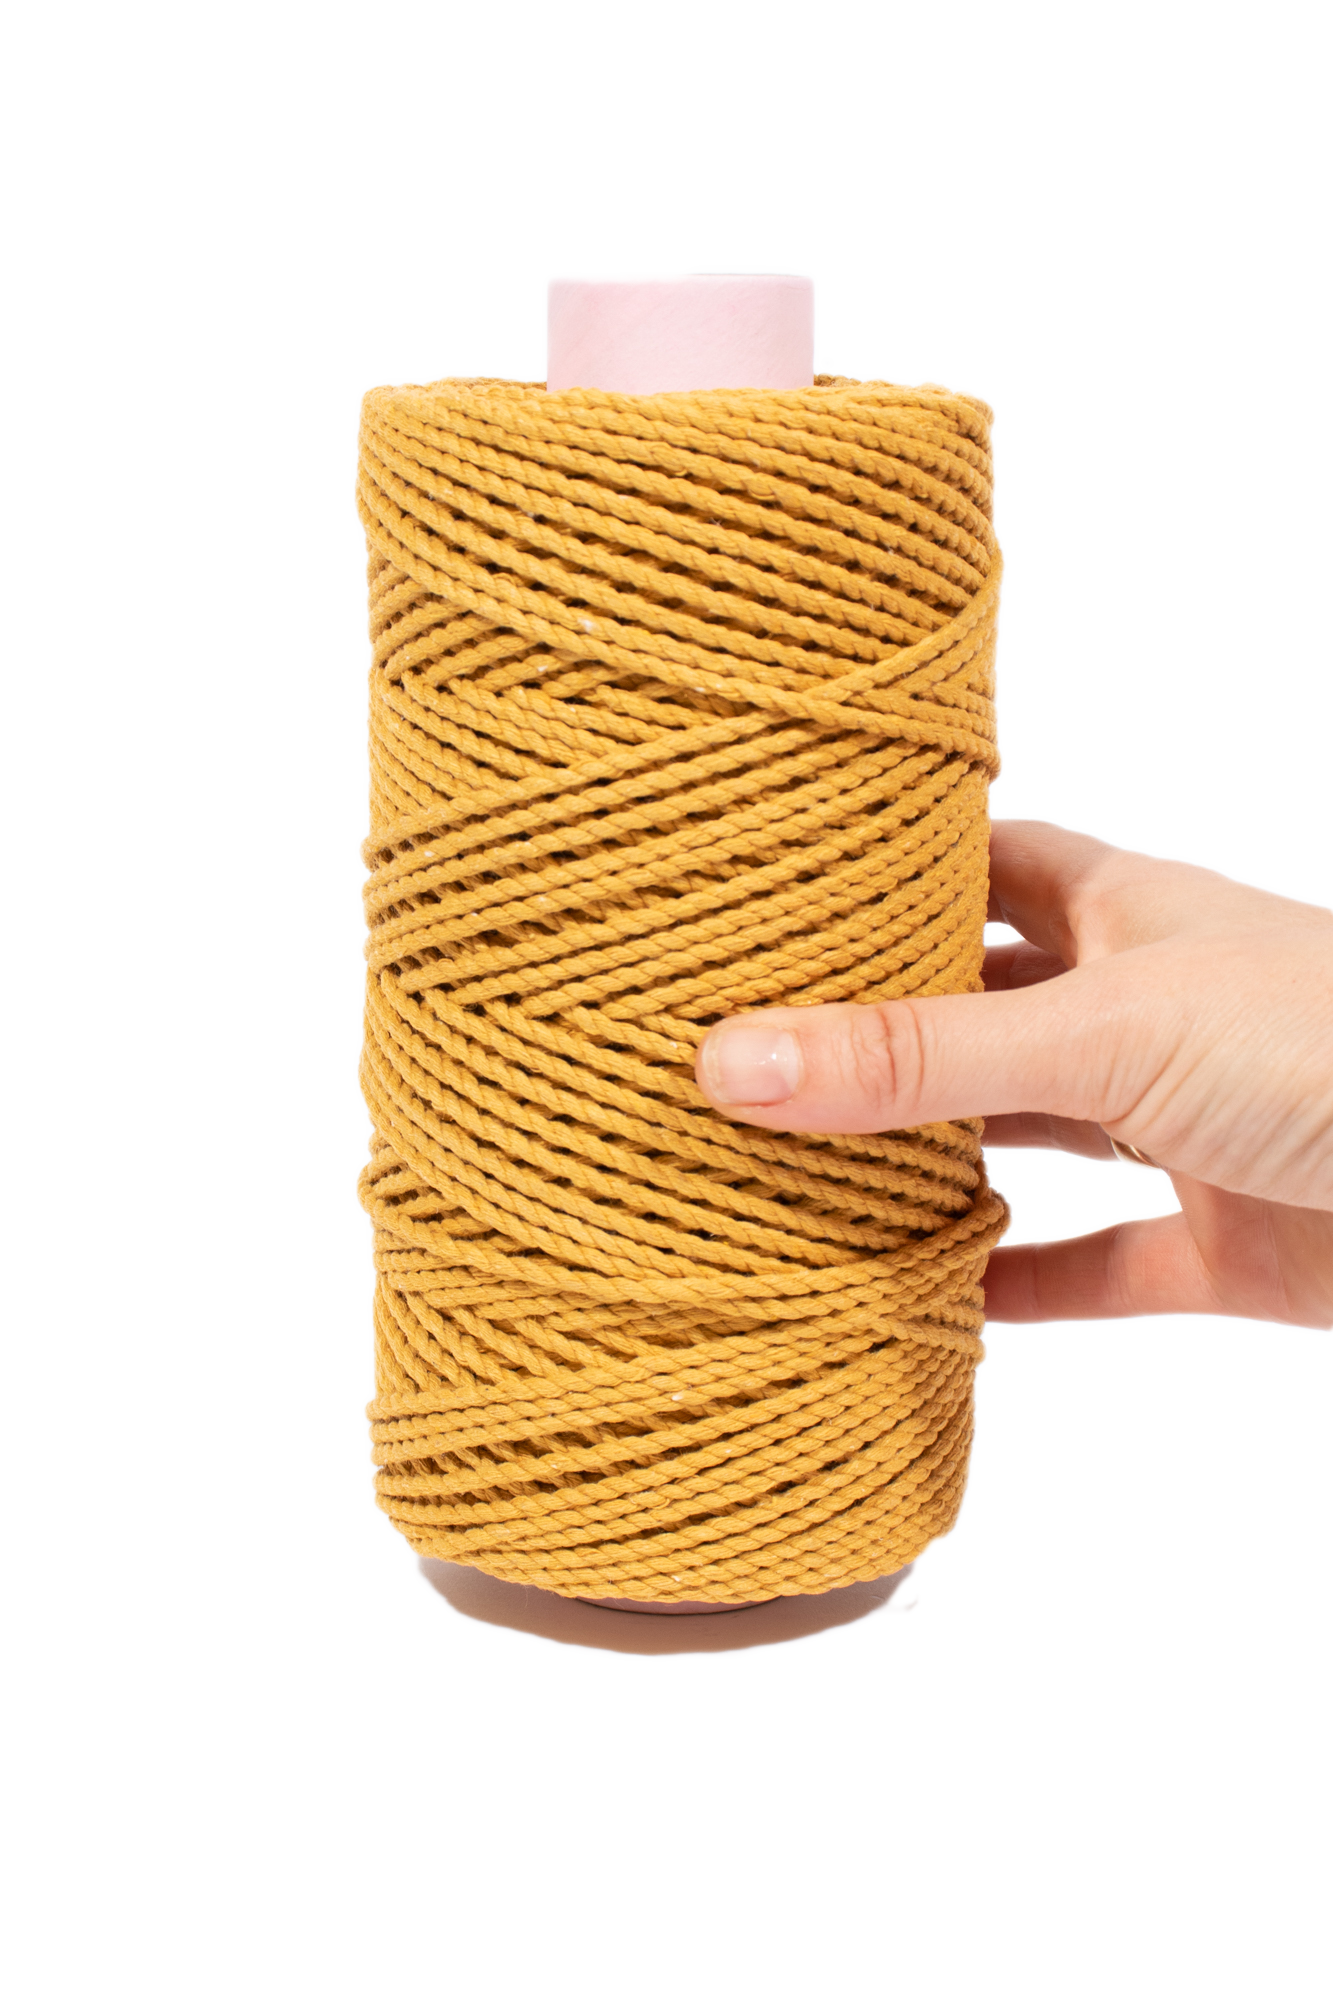 Metallic Cotton Macramé Rope With Gold Thread - 3mm Crafting Cord